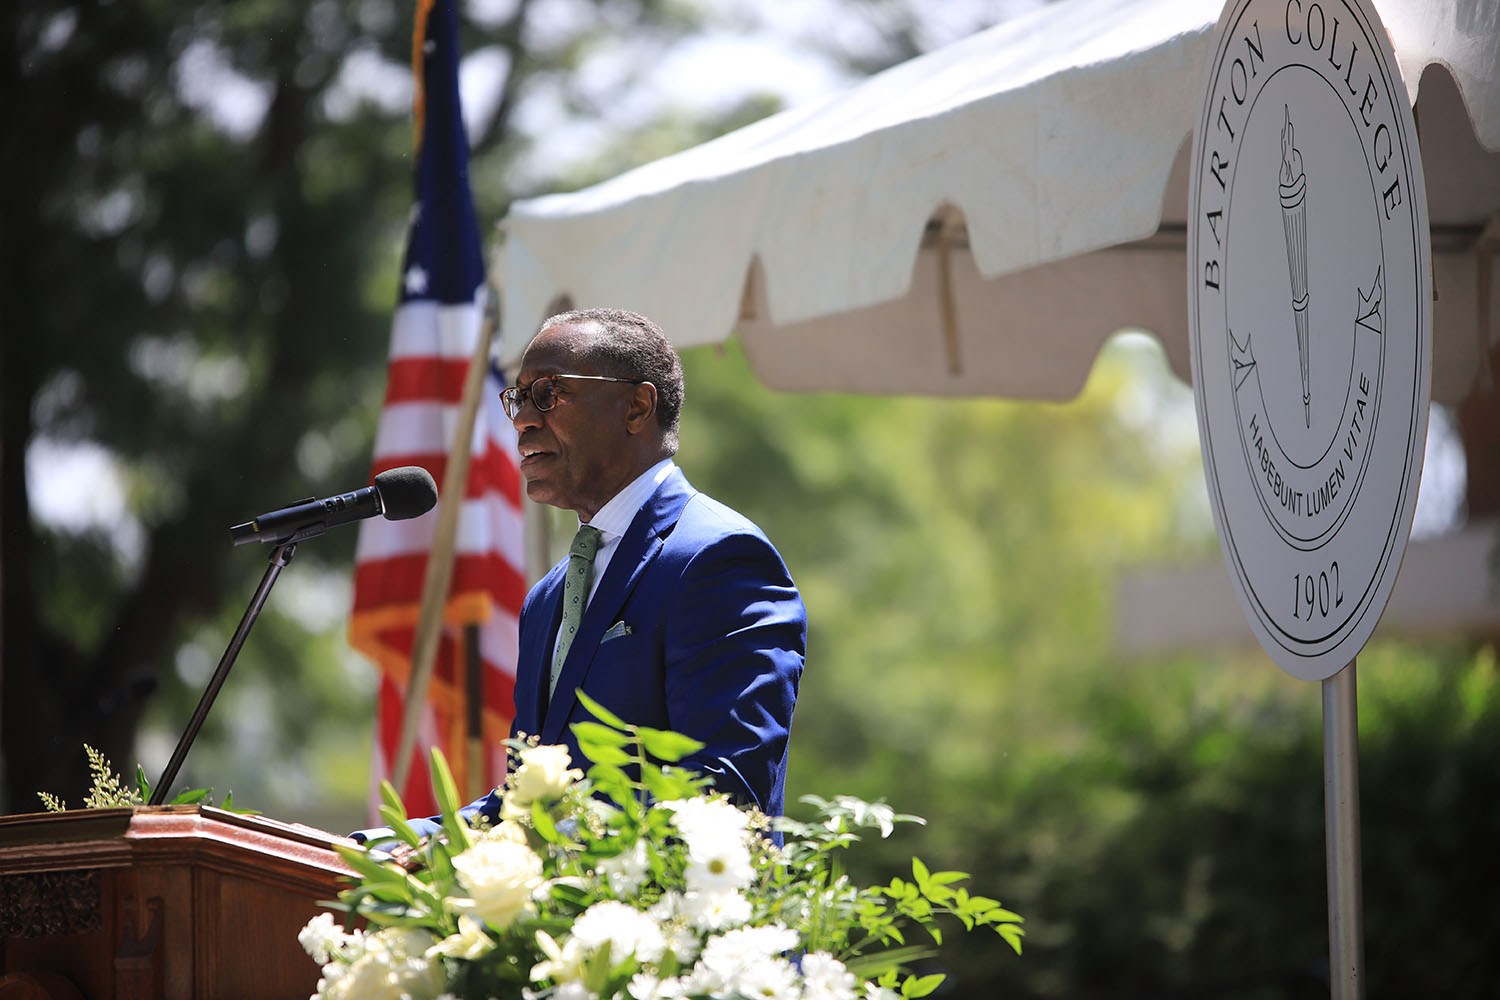 Featured image for post: Emory’s Inspiring Message Welcomed by Graduates at the 121st Commencement Exercises